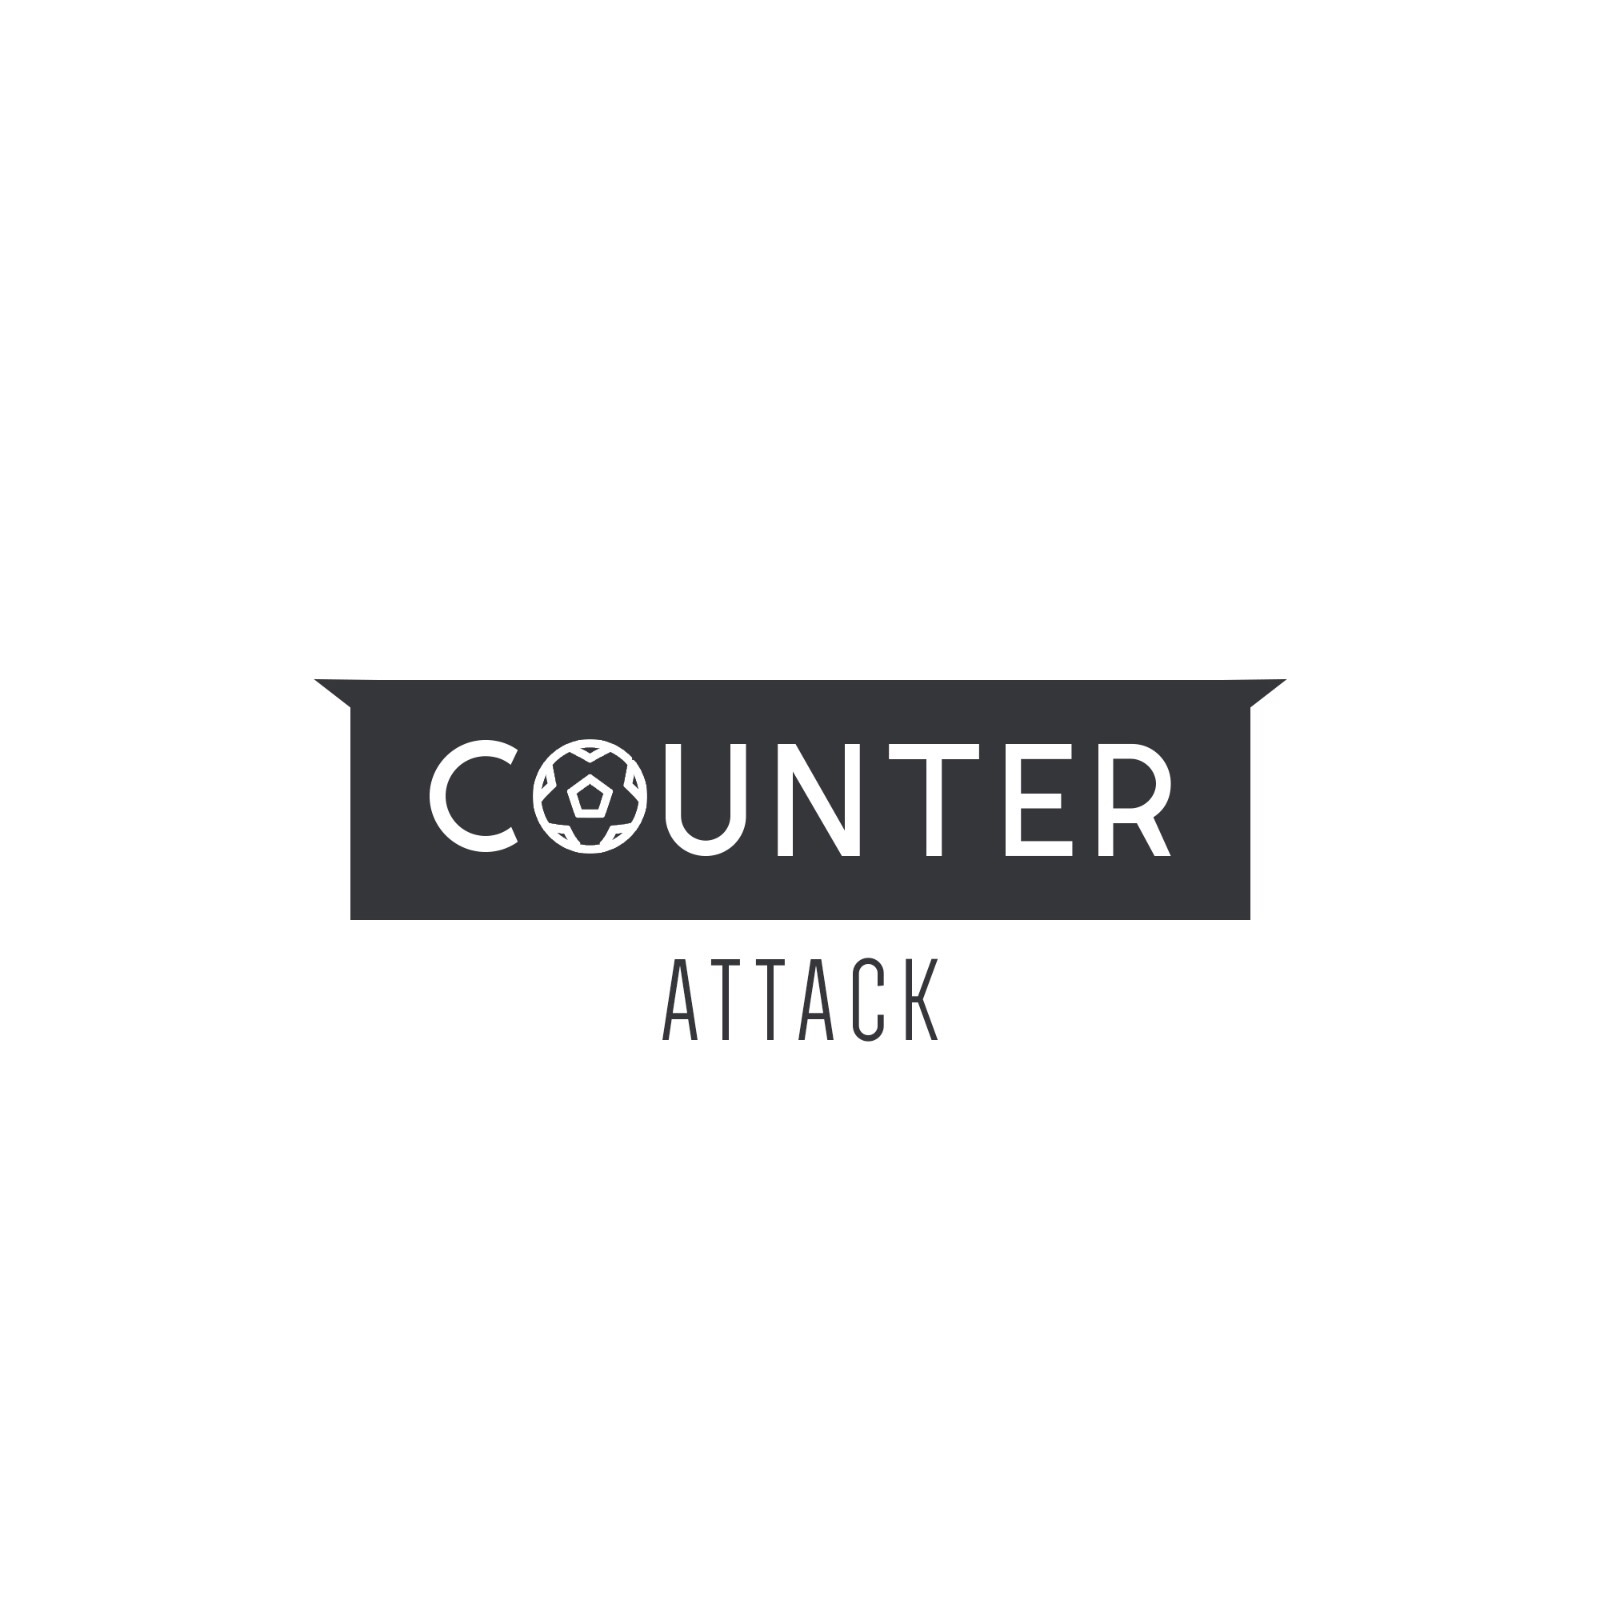 Counter Attack - Episode 59 - The Importance Of Diversity In Media